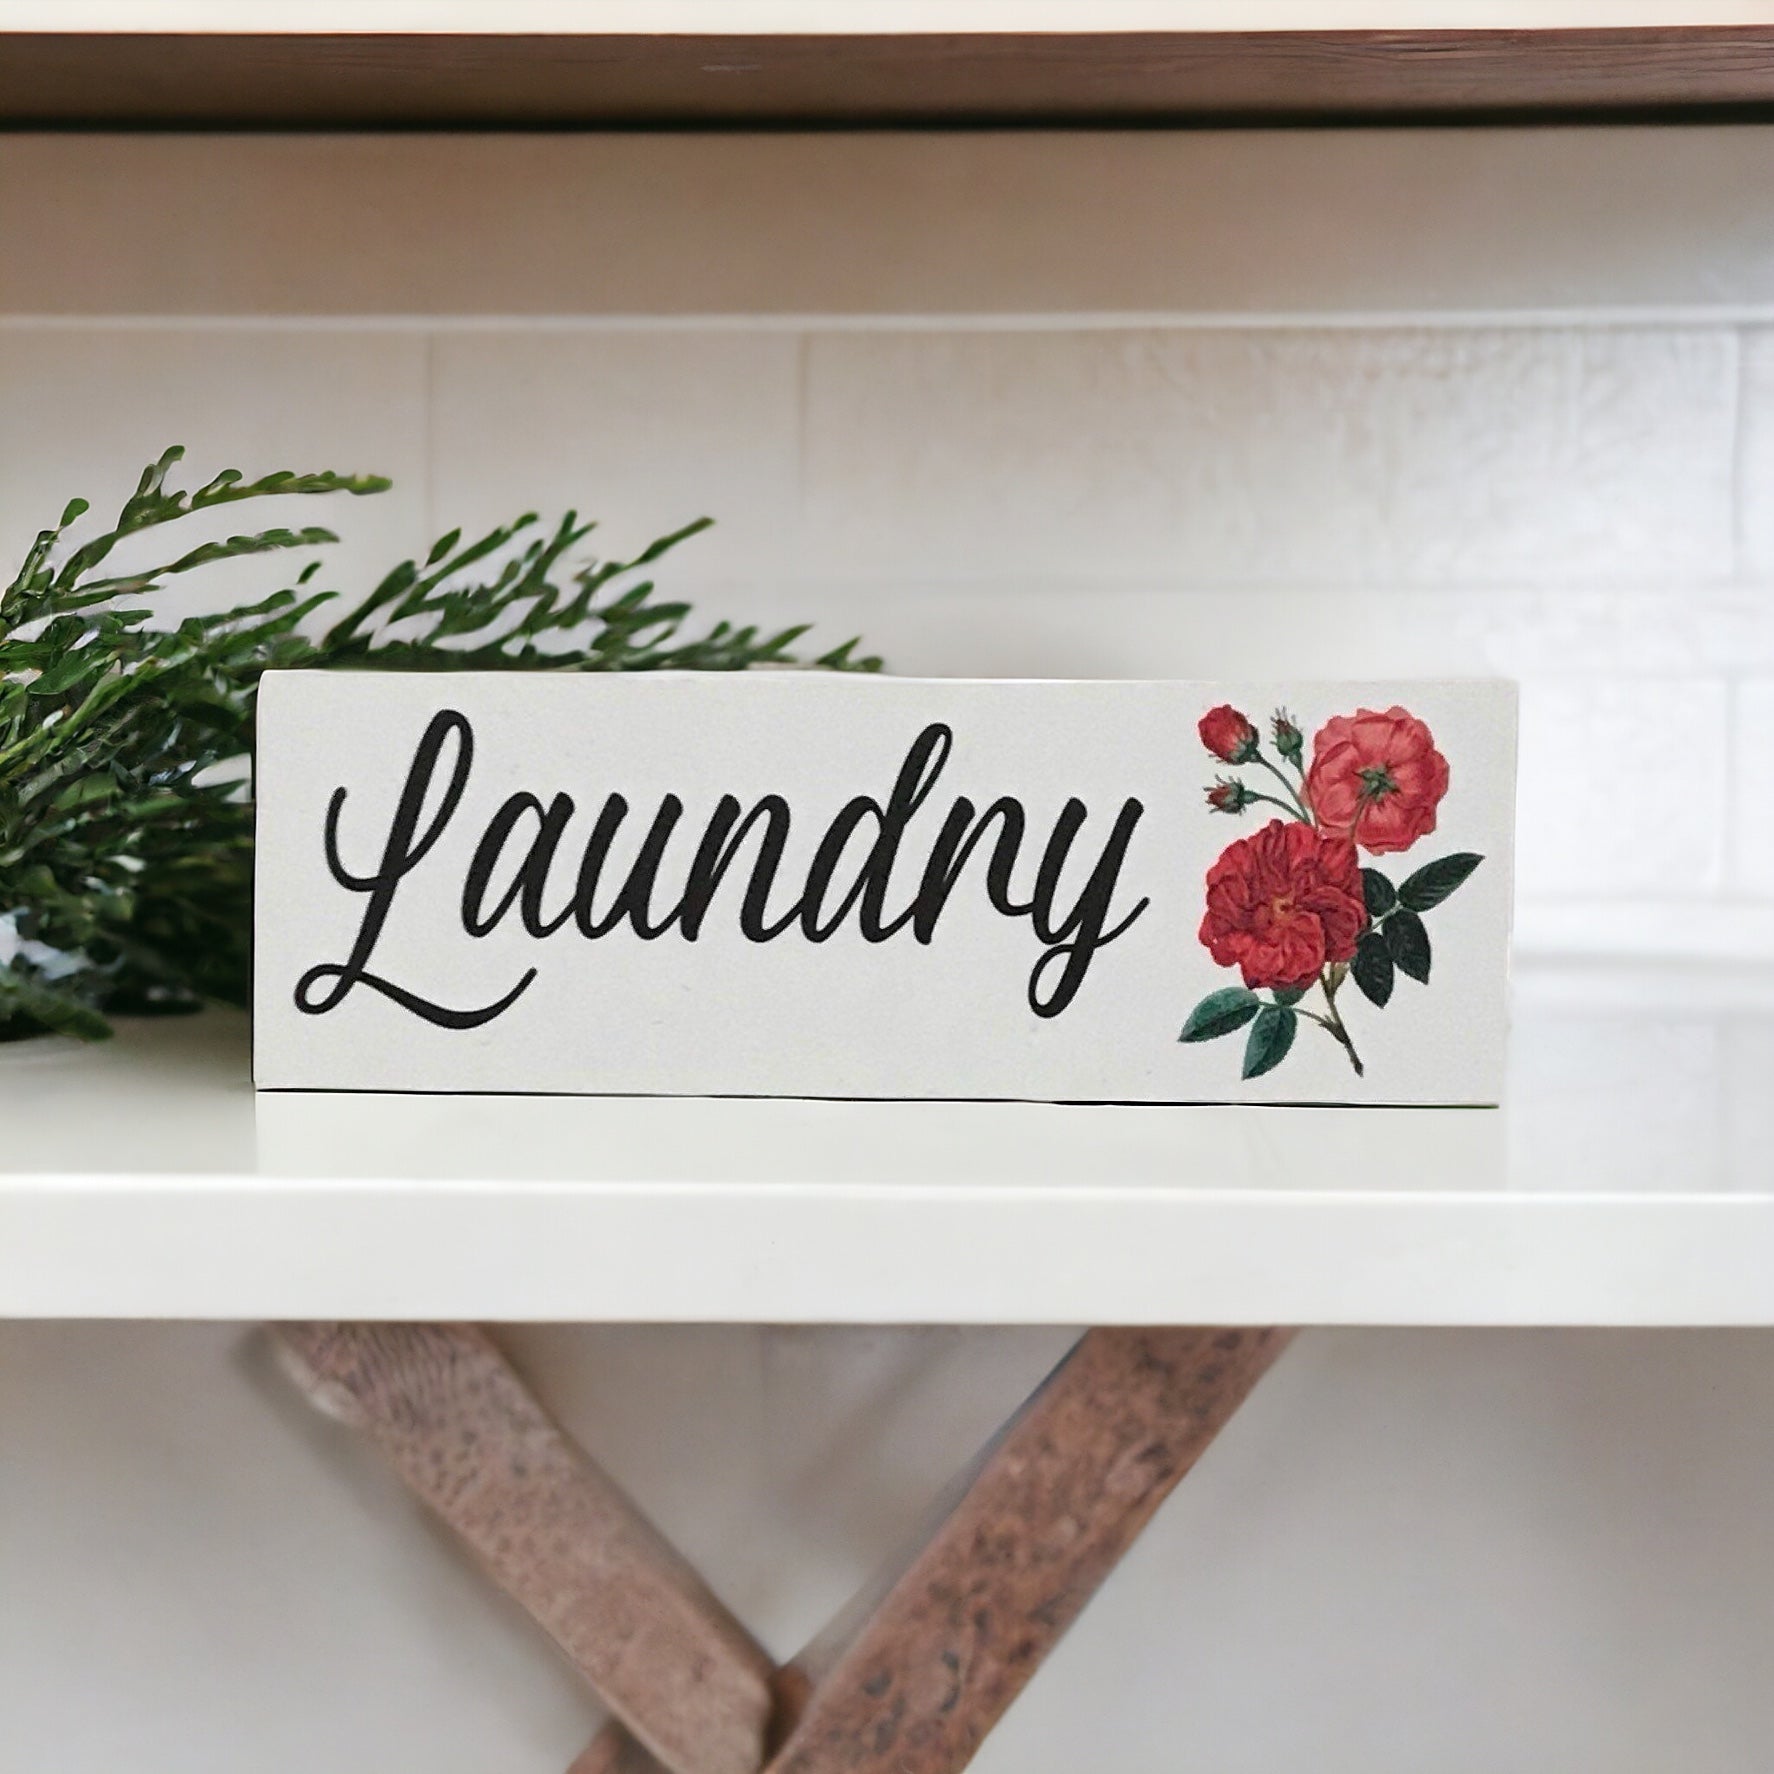 Red Rose Bud Toilet Laundry Bathroom Sign - The Renmy Store Homewares & Gifts 